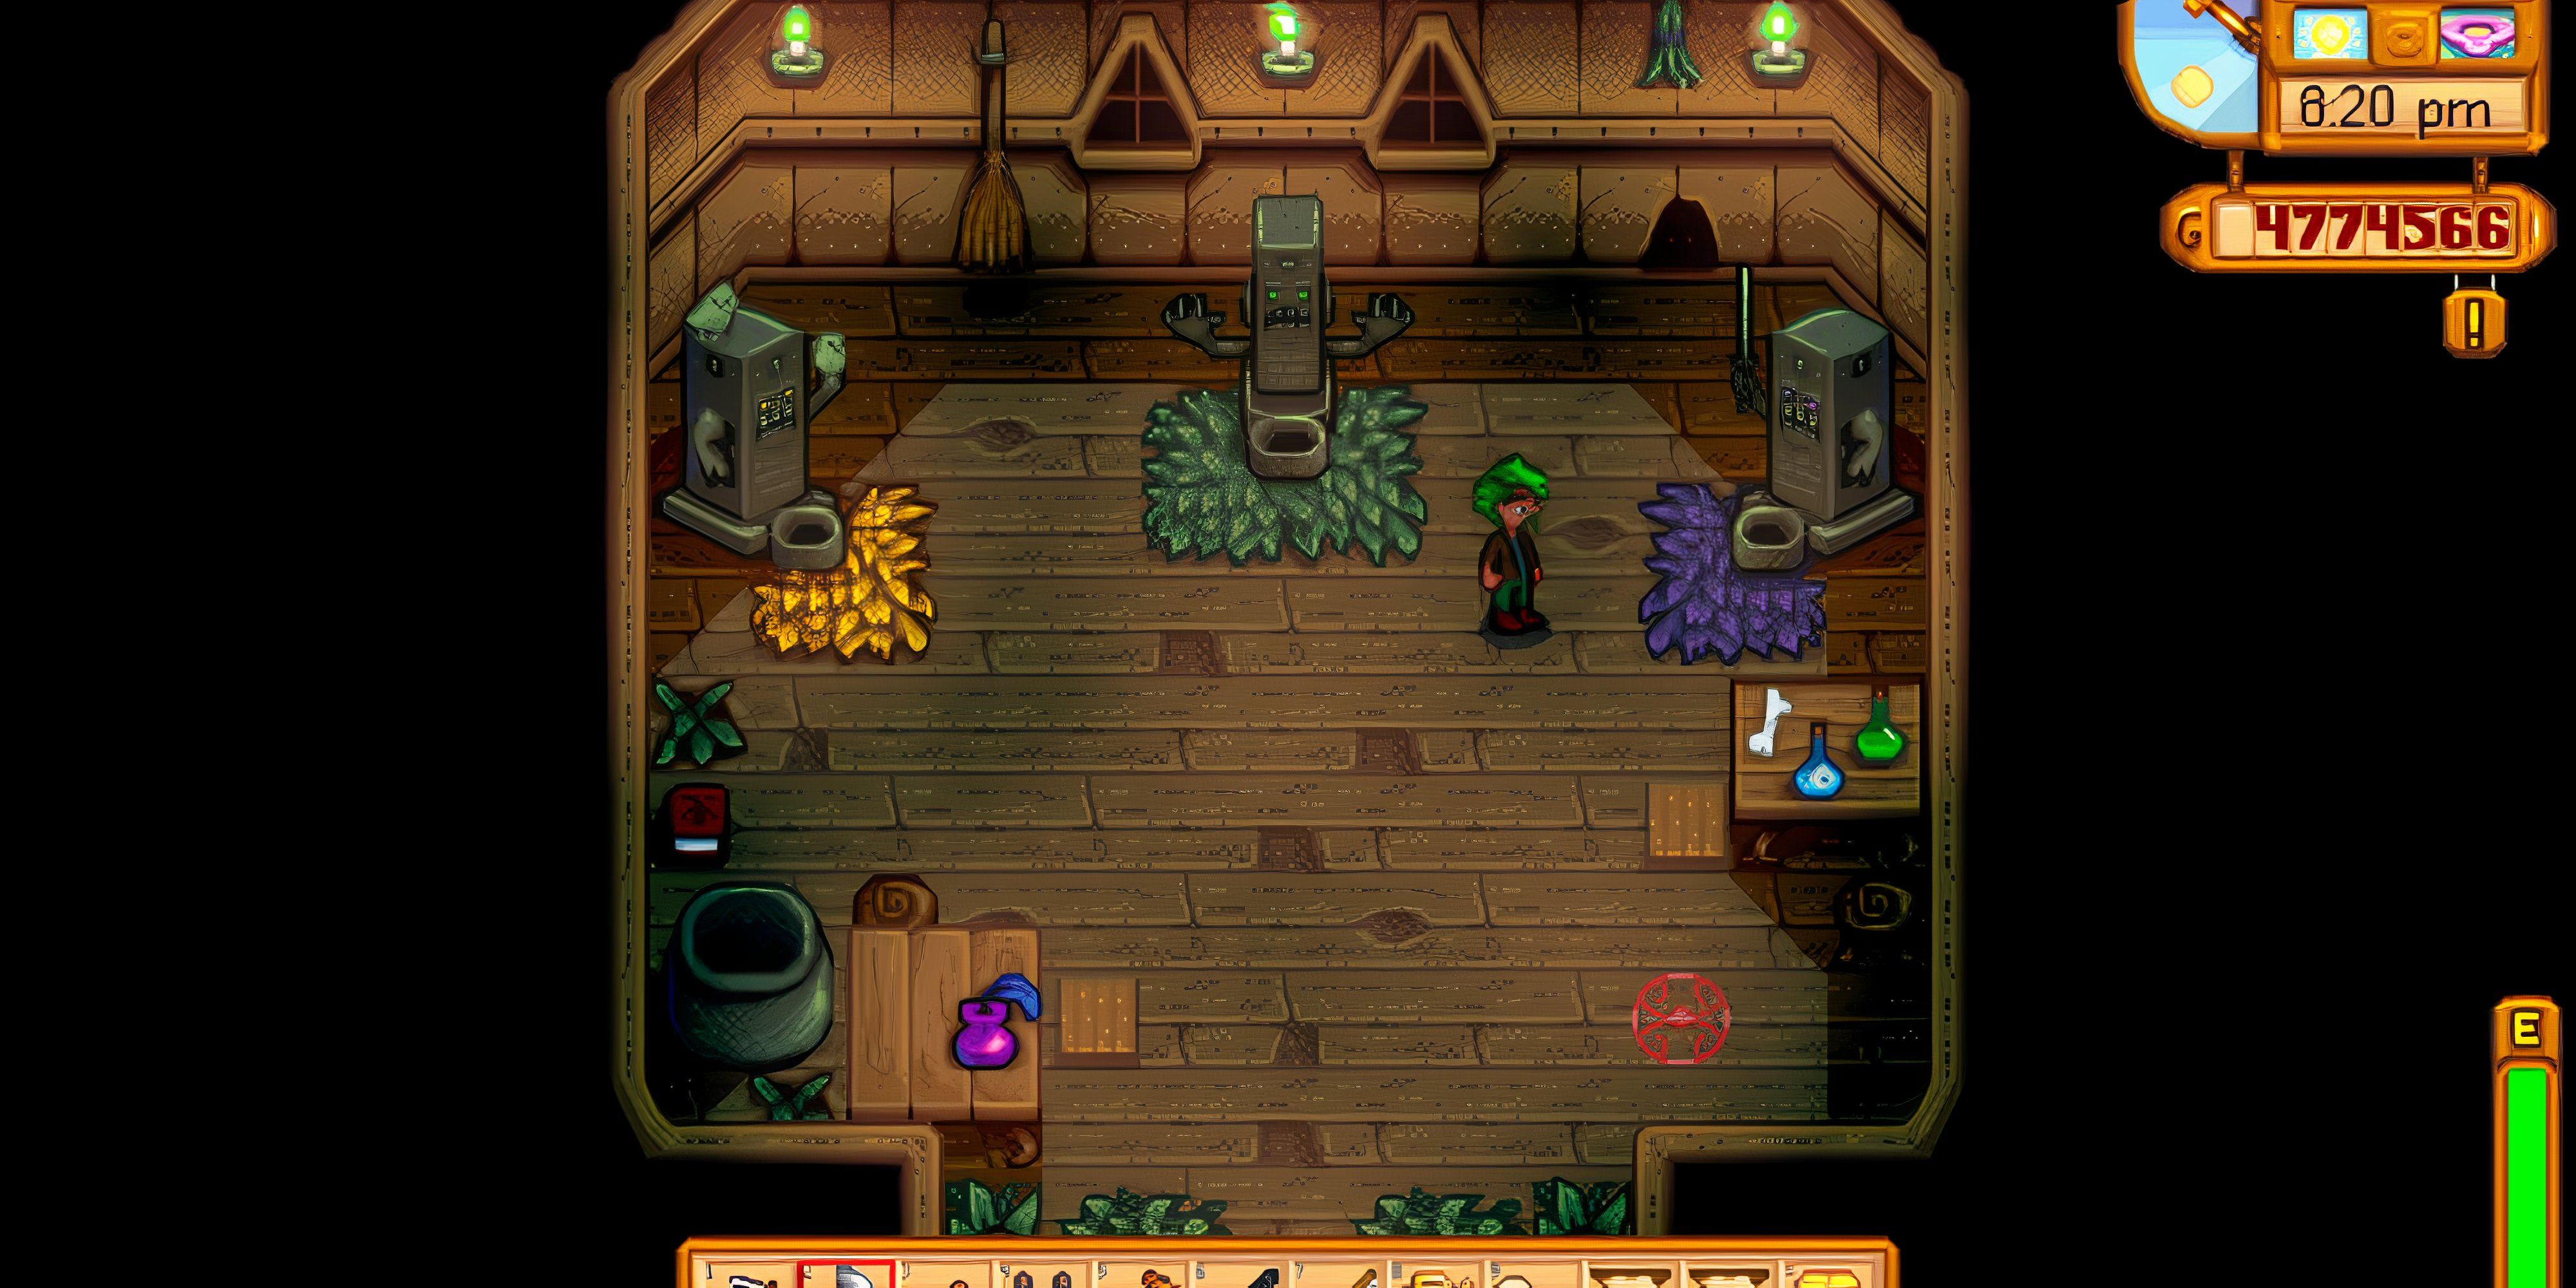 A character standing in a Witch's hut in Stardew Valley